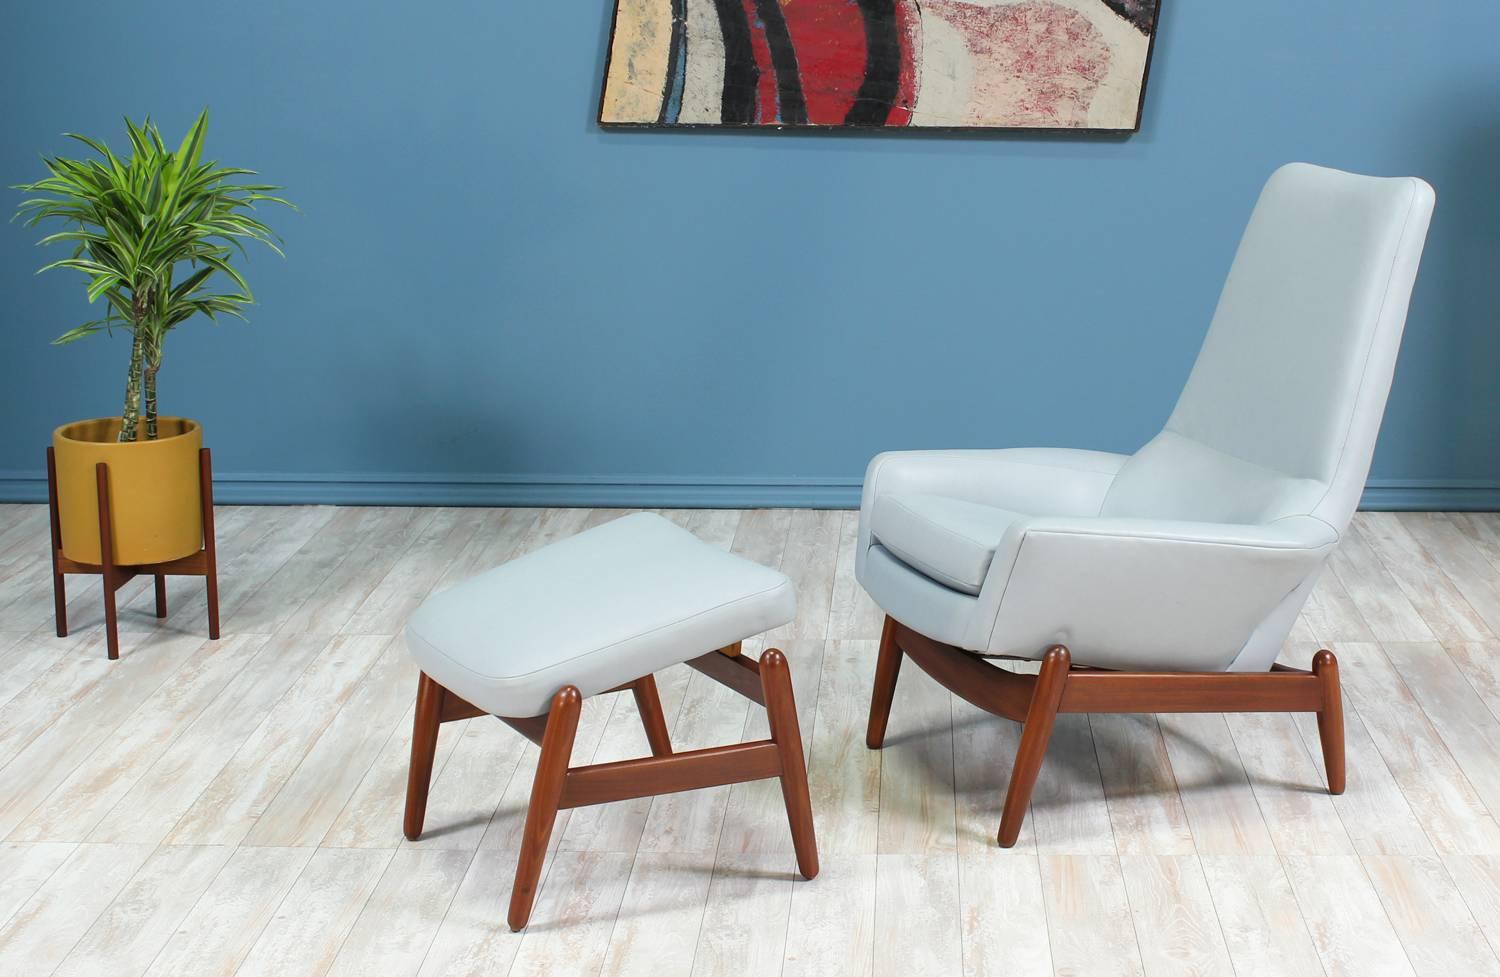 Lounge chair and Ottoman designed by Ib Kofod-Larsen for Povl Dinesen in Denmark circa 1950’s. Featuring an angled frame made of Afromosia teak wood that holds the recently upholstered seat in a beautiful light blue full grain leather. Both chair